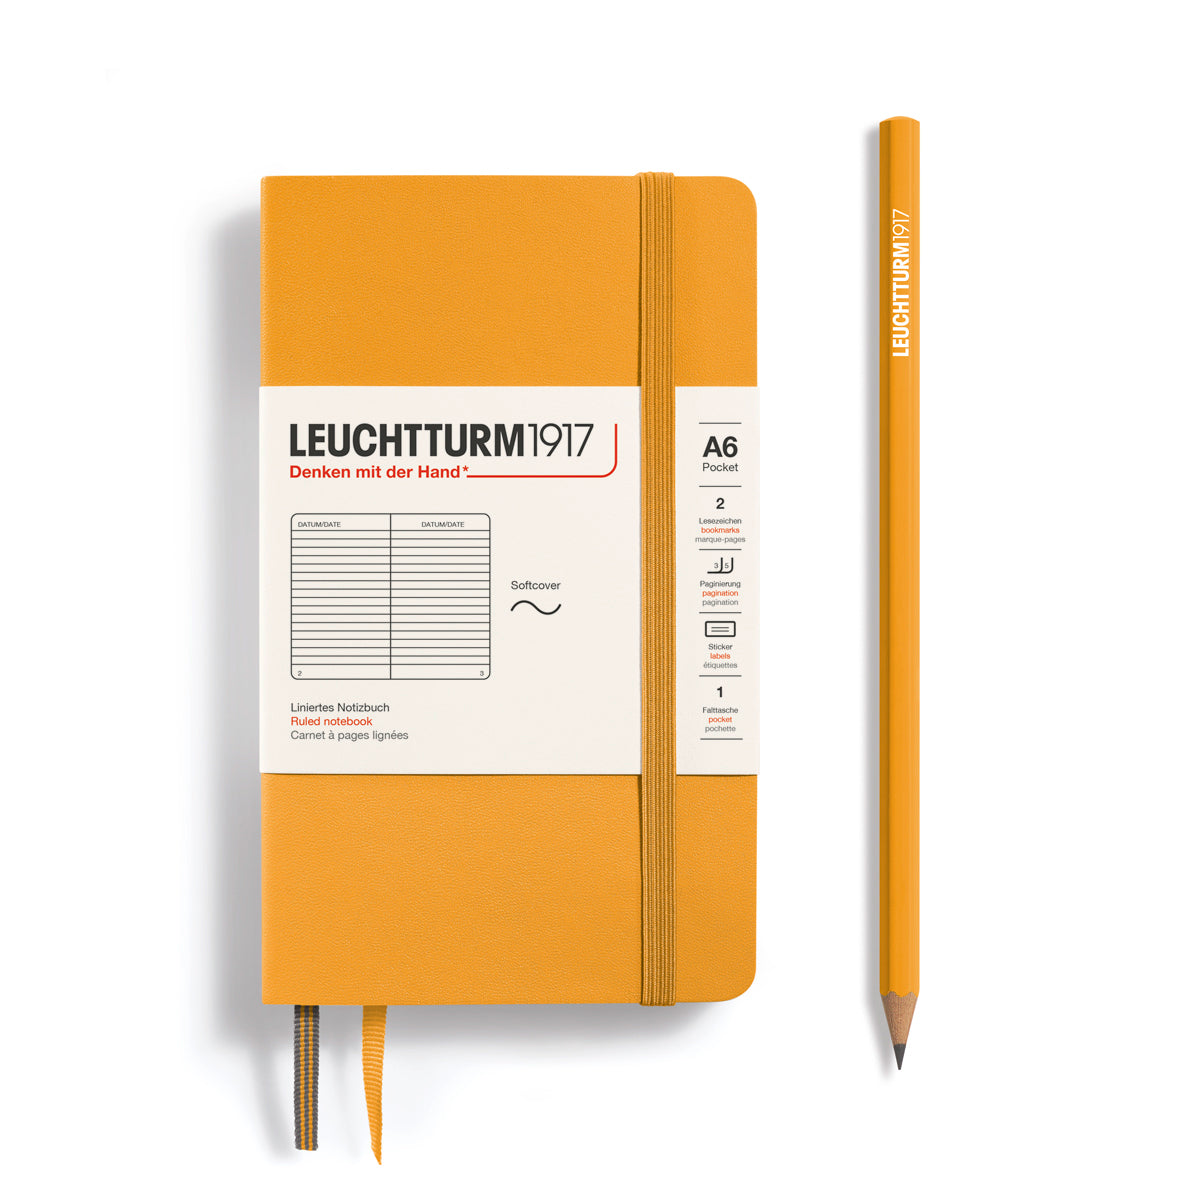 LEUCHTTURM1917 Notebook A6 Pocket Softcover in rising sun orange and ruled inside at Penny Black